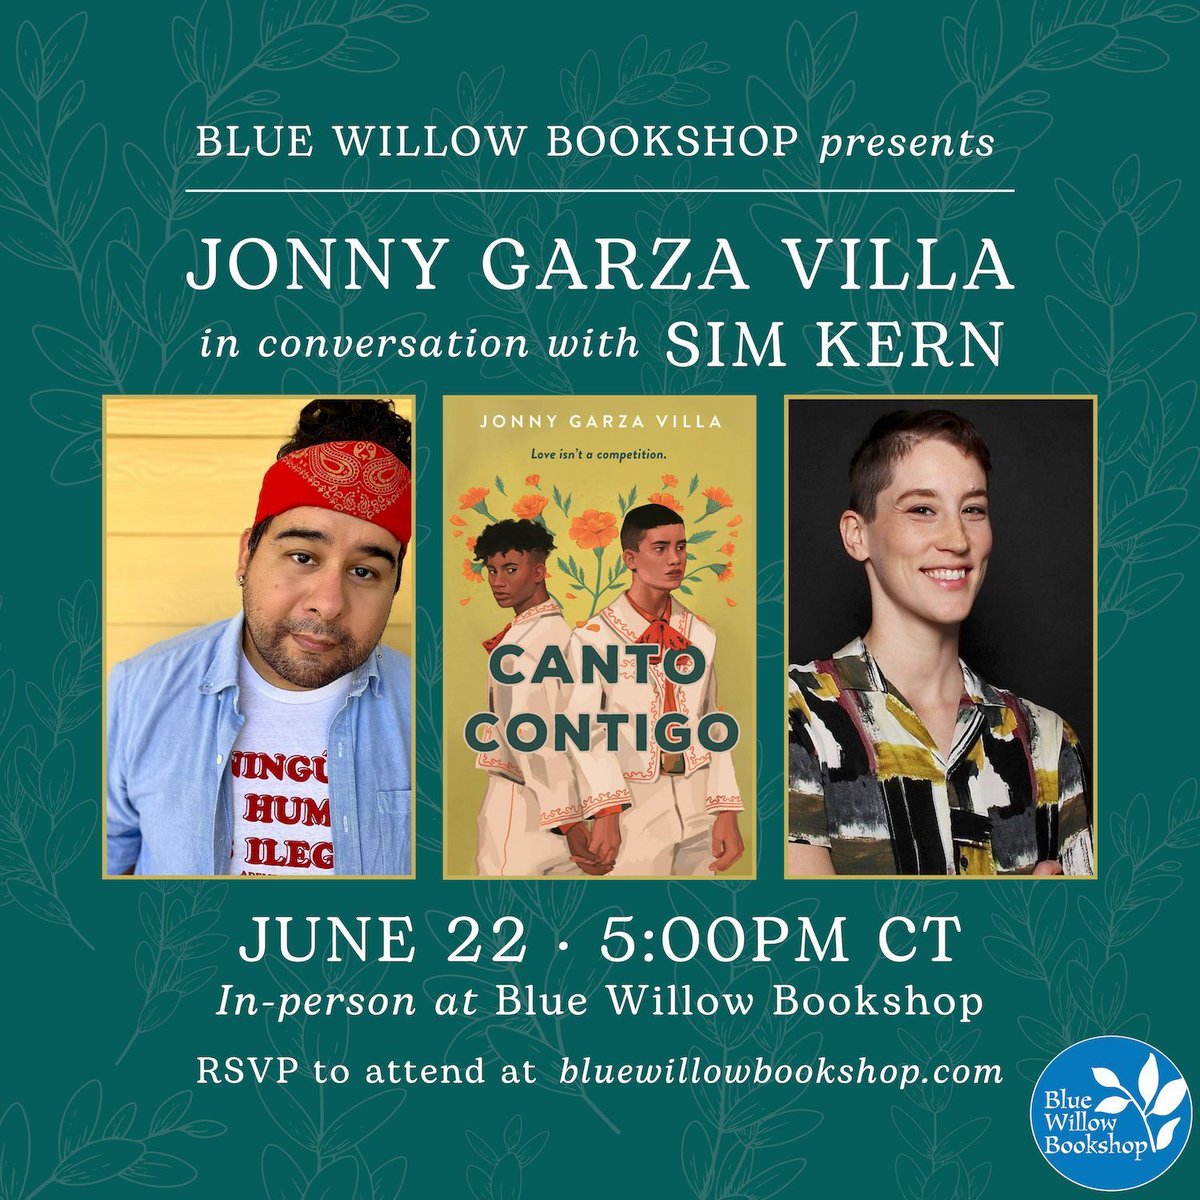 We are SO excited to welcome @JONNYescribe to the bookshop to celebrate their new novel, CANTO CONTIGO! 💛 They will appear in conversation with author @sim_kern. We can't wait for this event! See event details and reserve your book here: bluewillowbookshop.com/event/garzavil…